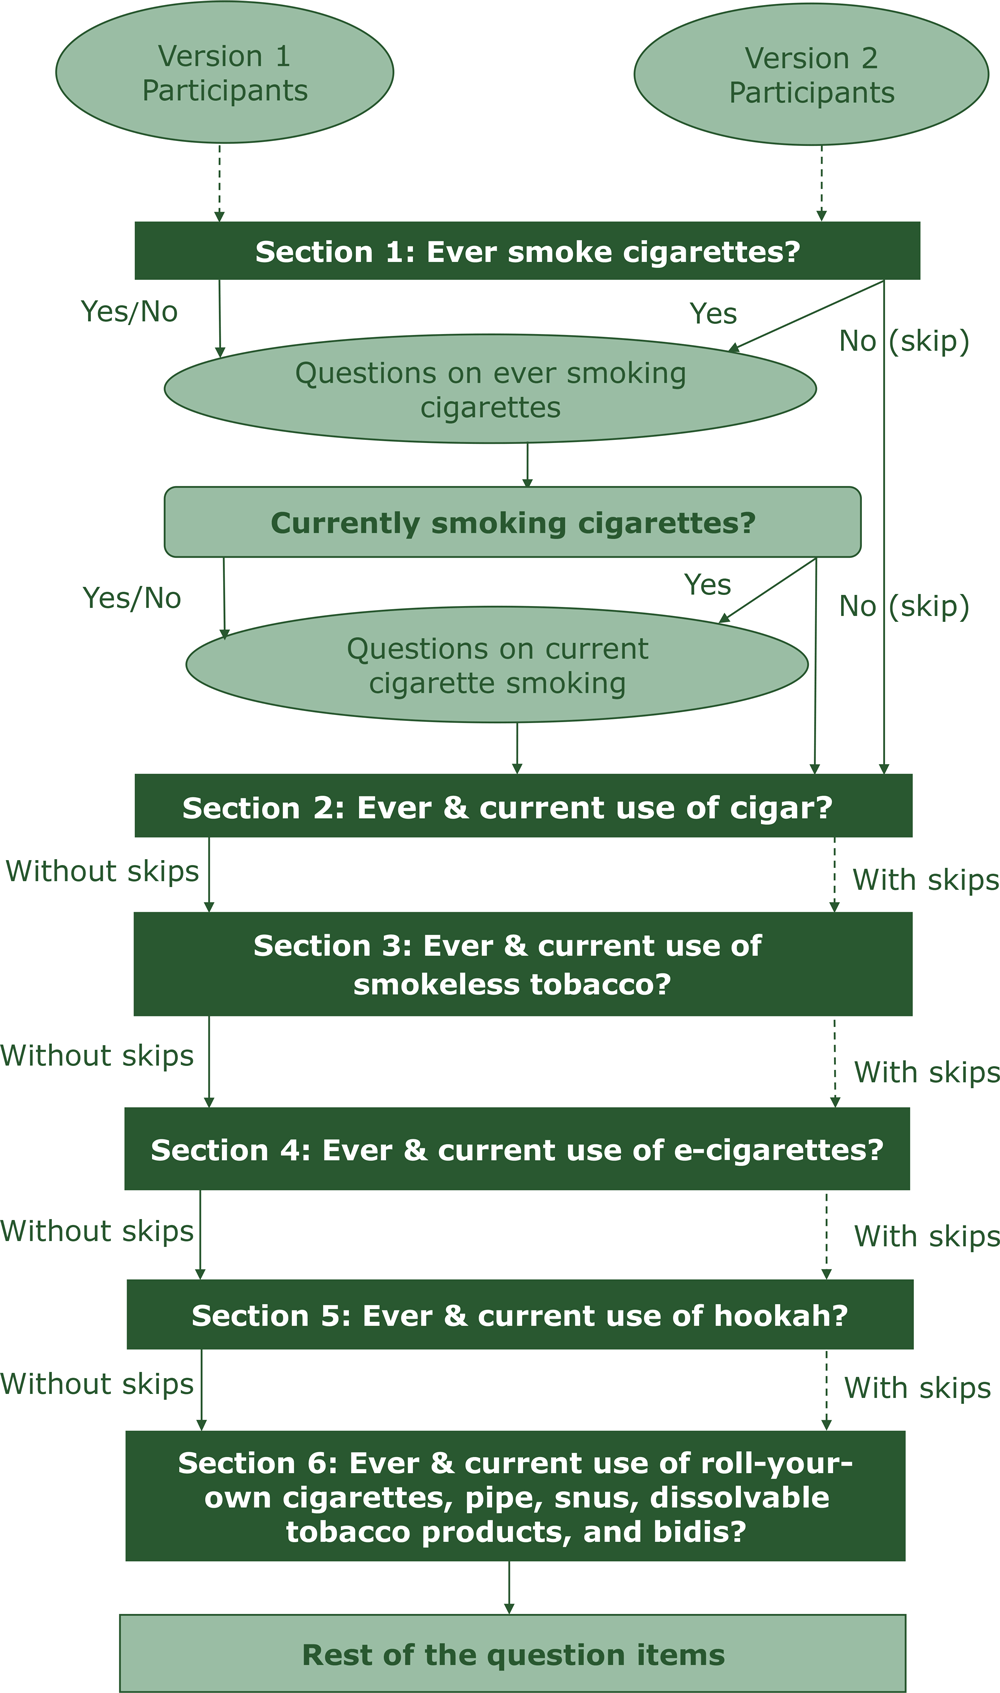 Participants response, routes by survey version in an electronic pilot, National Youth Tobacco Survey, 2018.